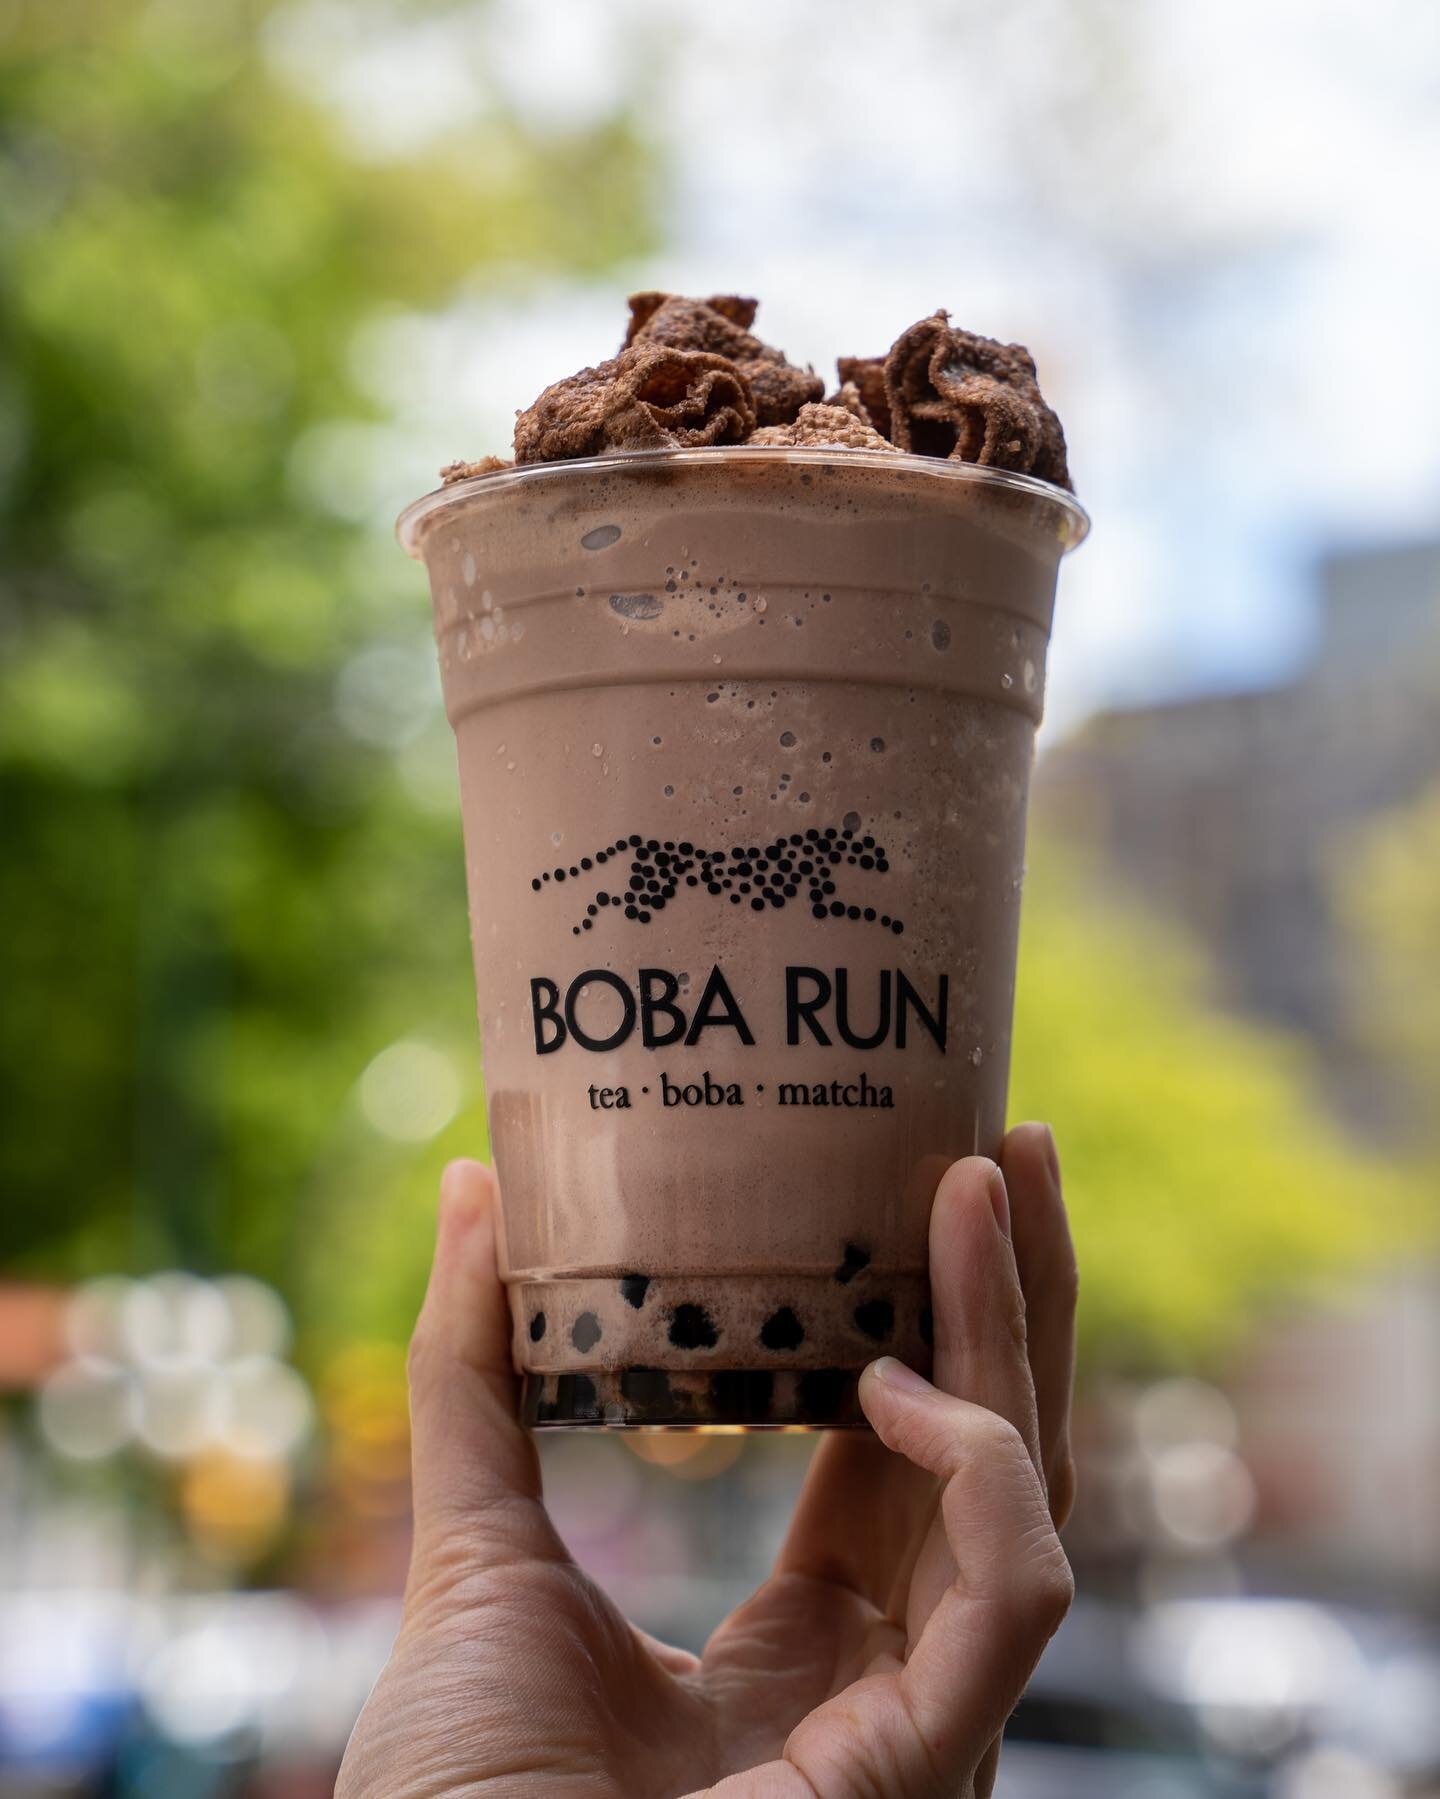 THIS MILKSHAKE BRINGS ALL THE TURTLES TO THE YARD!⁠
⁠
Chocolate Churro Shake⁠
Chocolate turtle chip toppings🐢! It's chocolate-y, cinnamon-y and reminds us of fun summer days at the carnival!🎡⁠
___⁠
⁠
#yvrfoodie #vancouverchefs #vancouverisawesome #